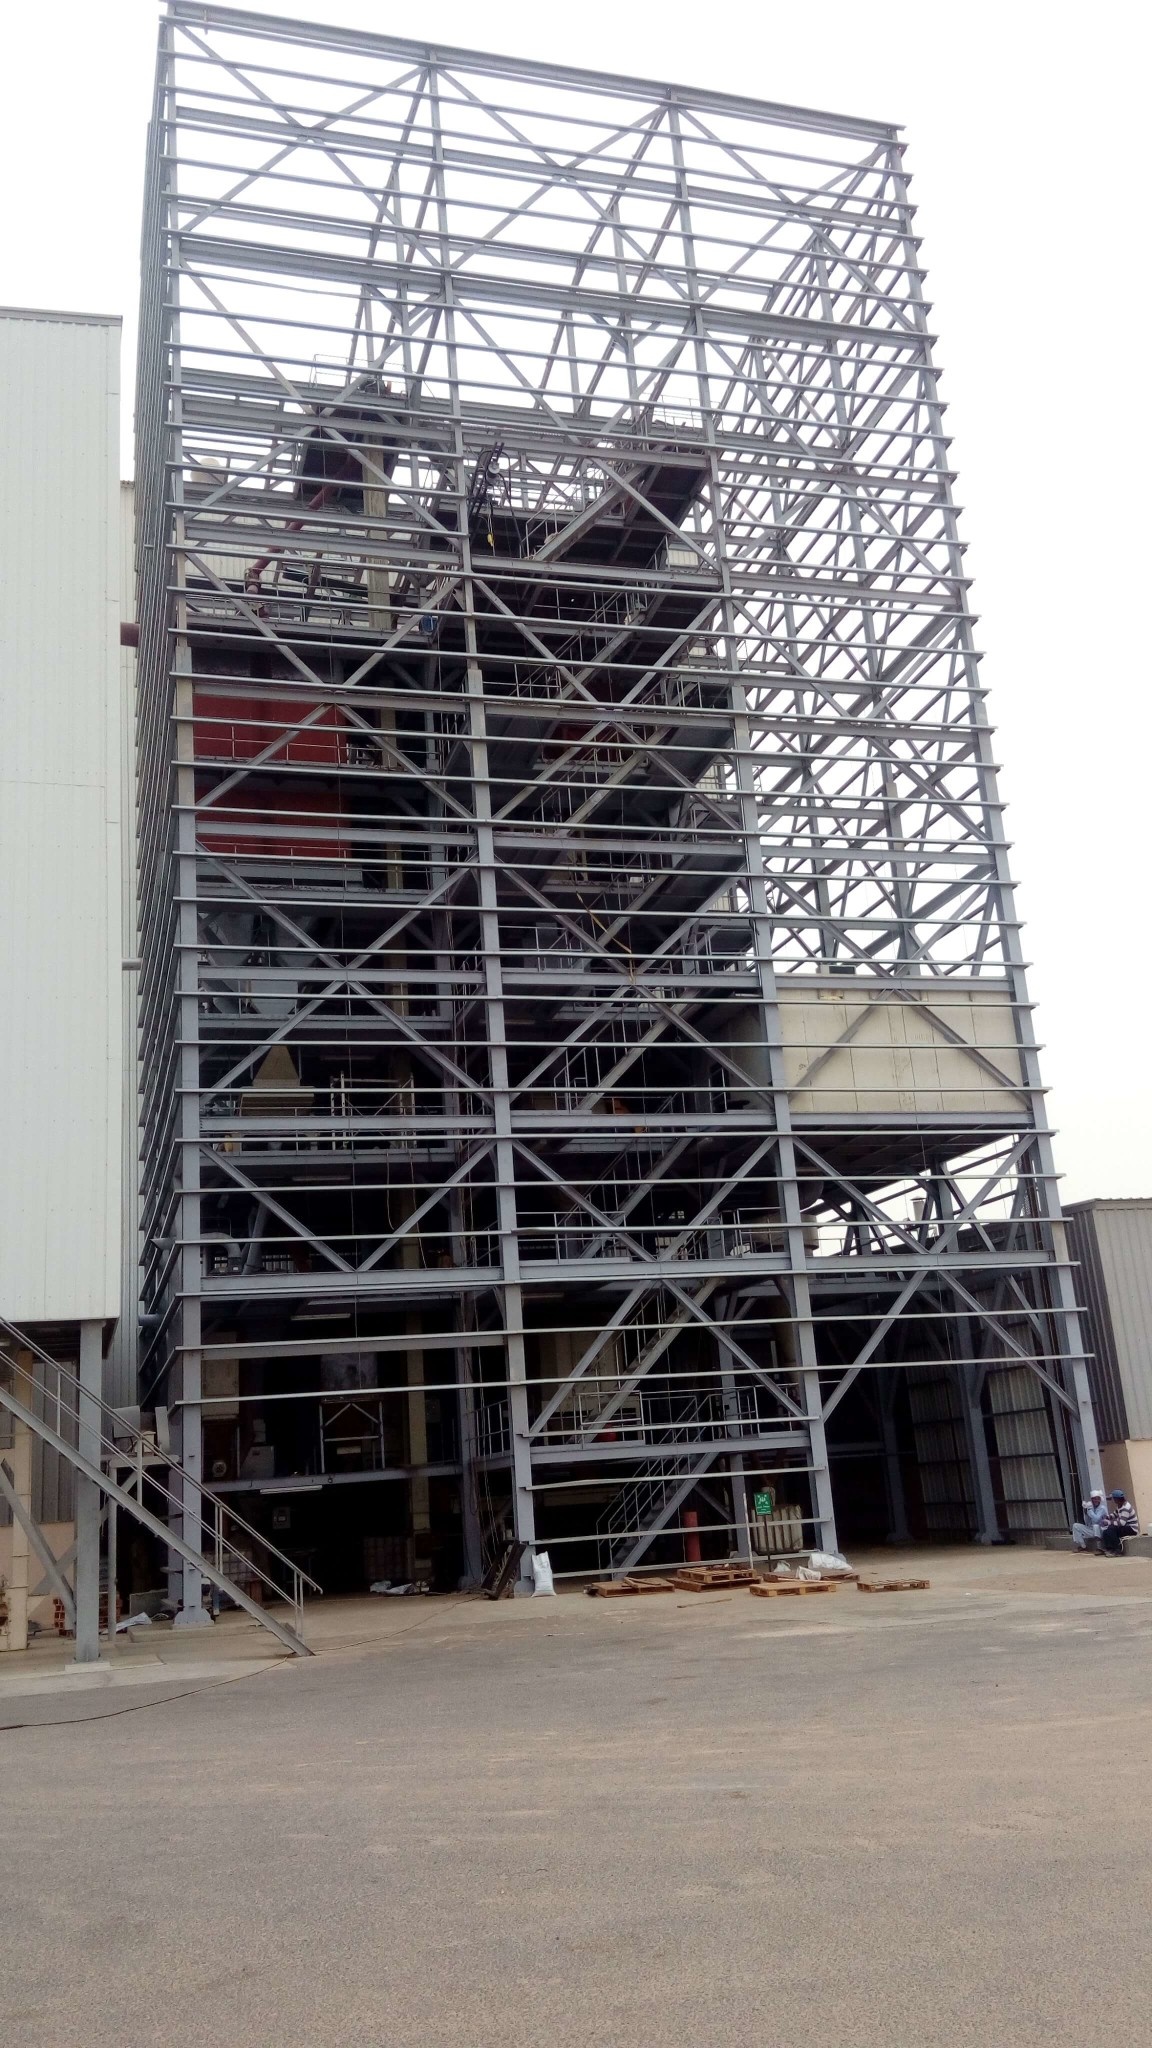 Fish feed extrusion tower